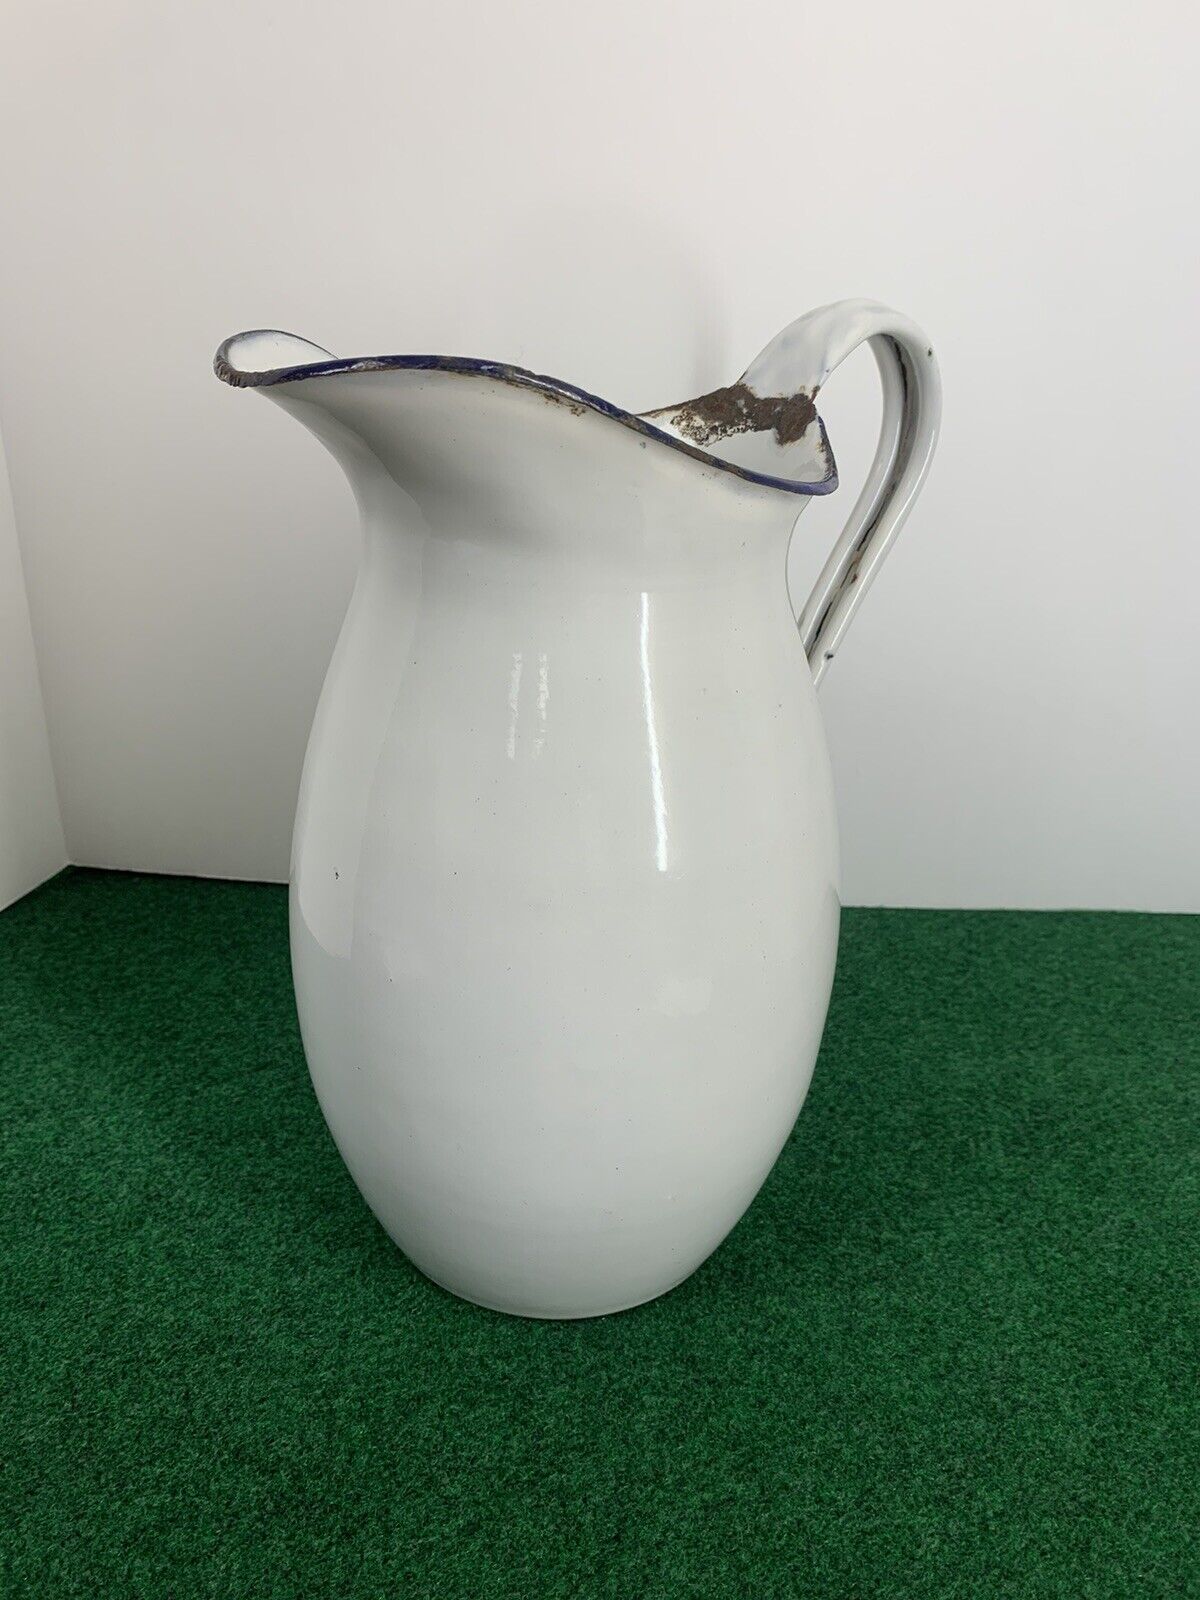 Antique L&G Manufacturing Co. White Enamelware Water Pitcher With Blue Trim-Rare